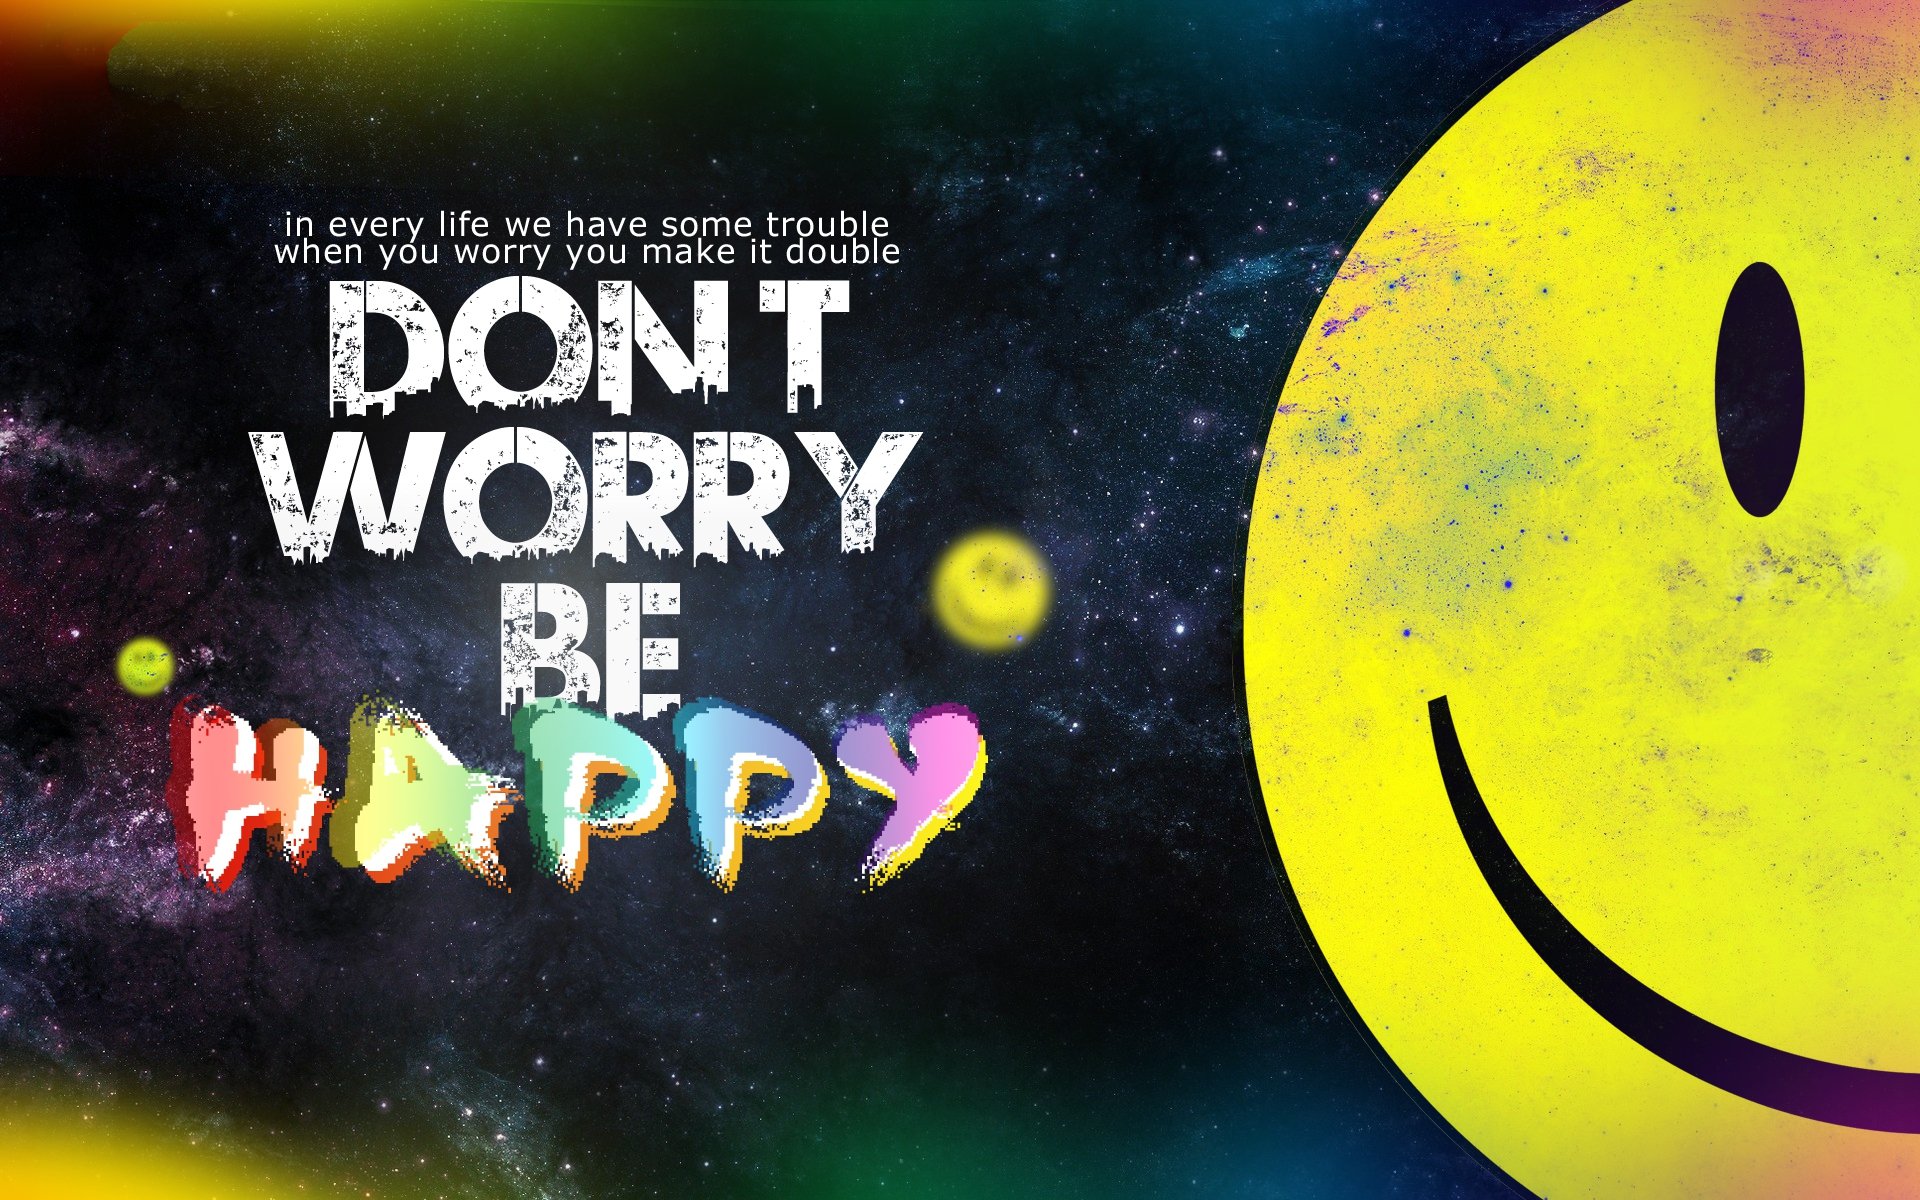 Be happy away. Don't worry be Happy. Донт вори би Хэппи. Надпись don't worry be Happy. Надпись донт вори би Хэппи.